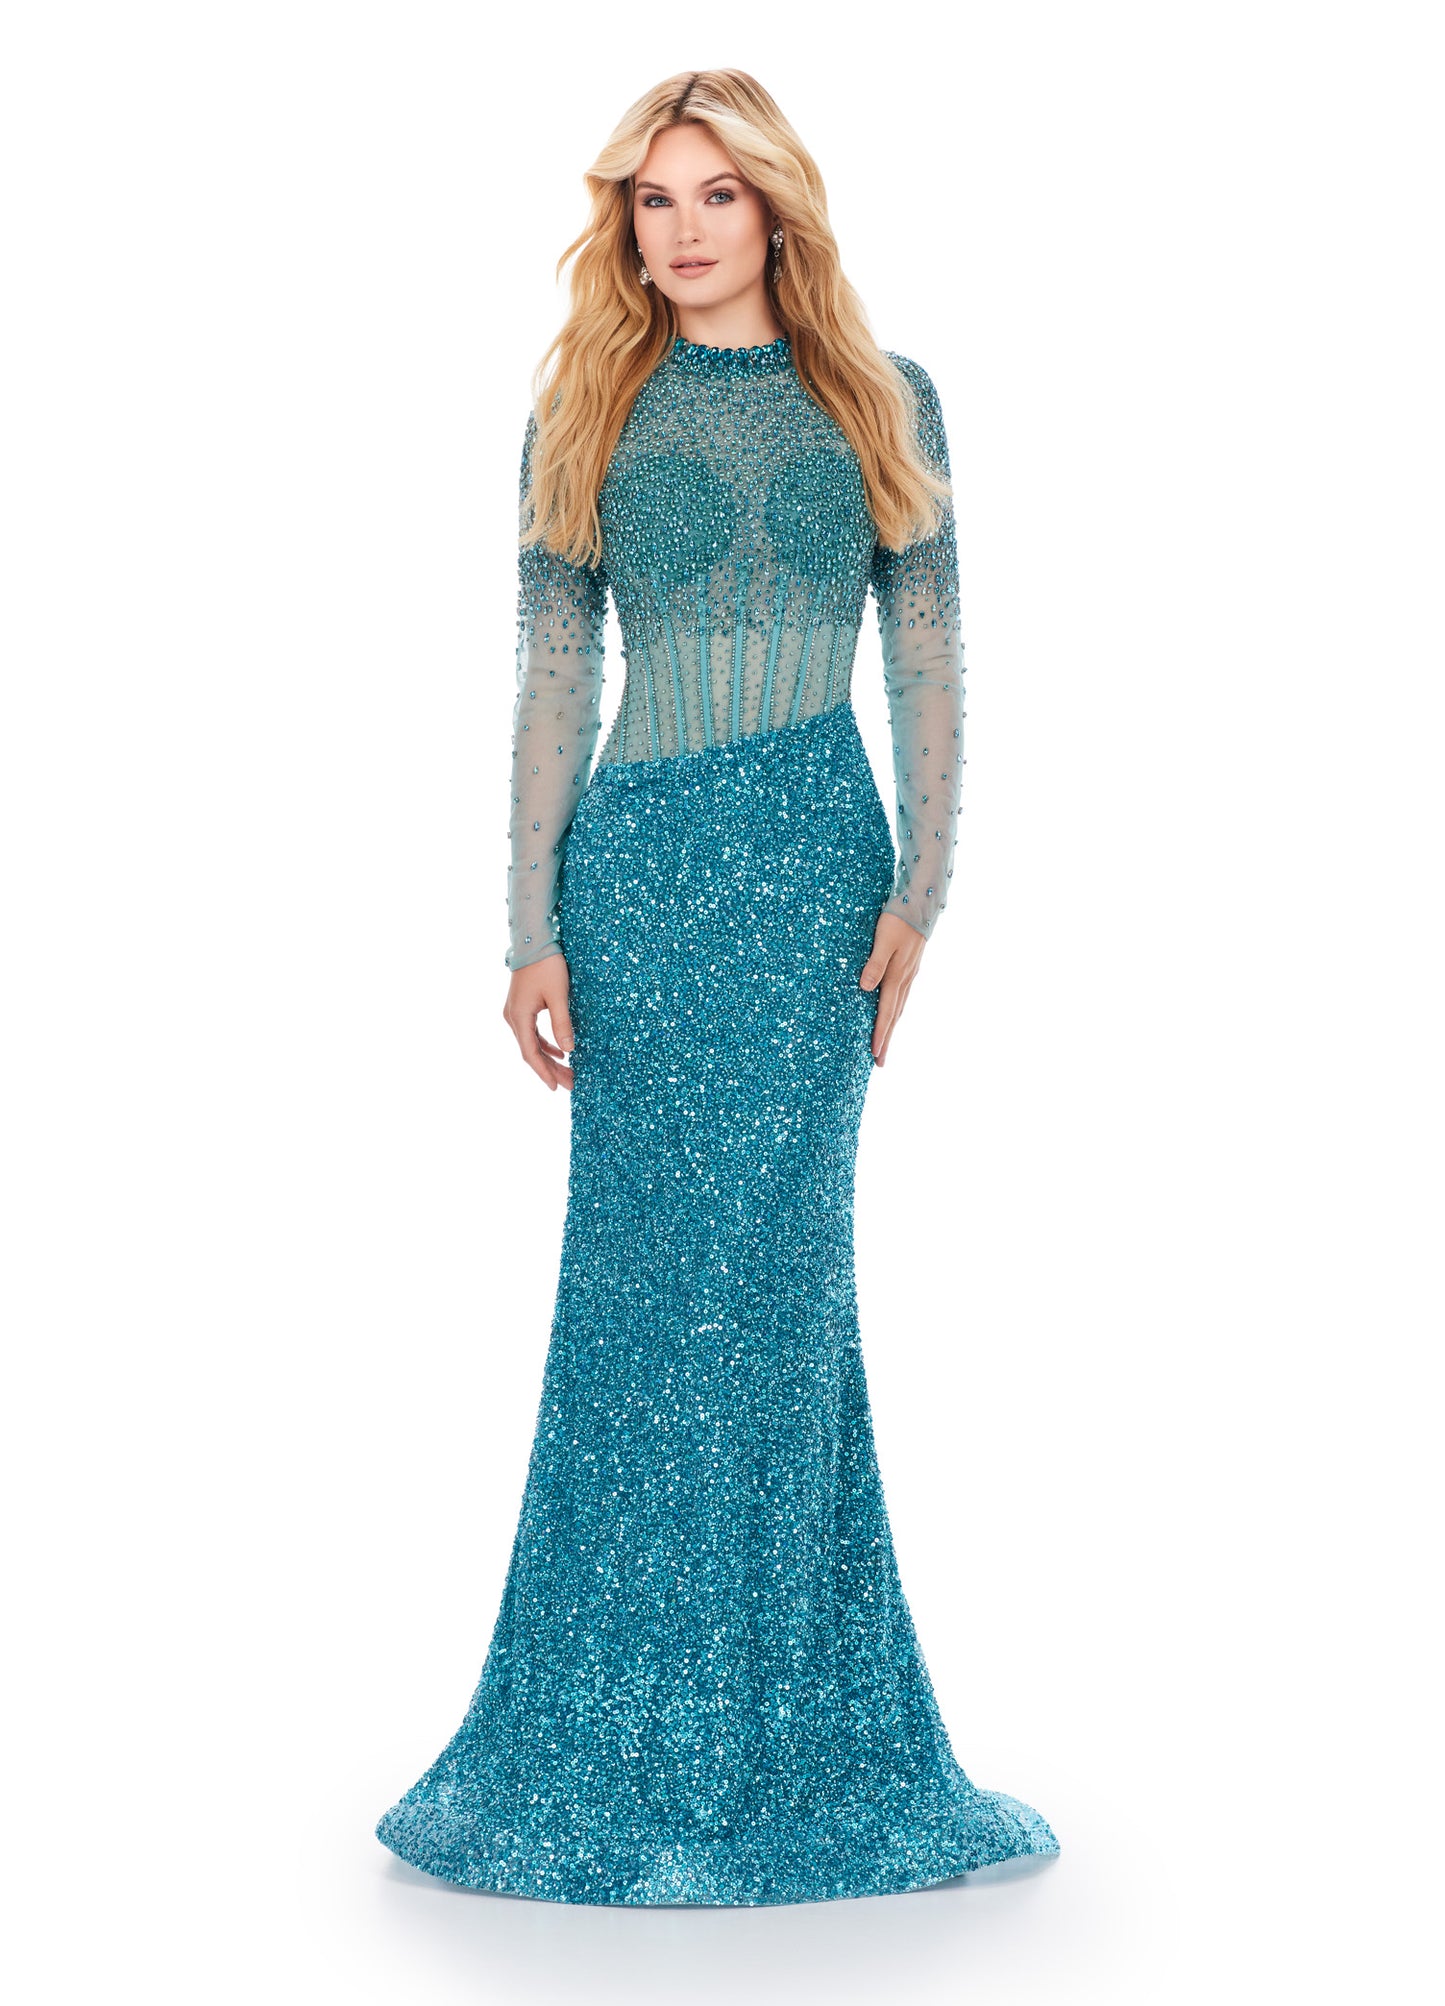 Introducing the Ashley Lauren 11522 Long Prom Dress. This elegant gown features long sleeves, intricate beadwork and a stunning exposed corset bustier. Perfect for formal events, pageants, or any special occasion. Make a statement with this timeless and luxurious gown. Absolute elegance and glamour! This fully beaded long sleeve gown features an exposed corset bustier that is perfect for your next event.